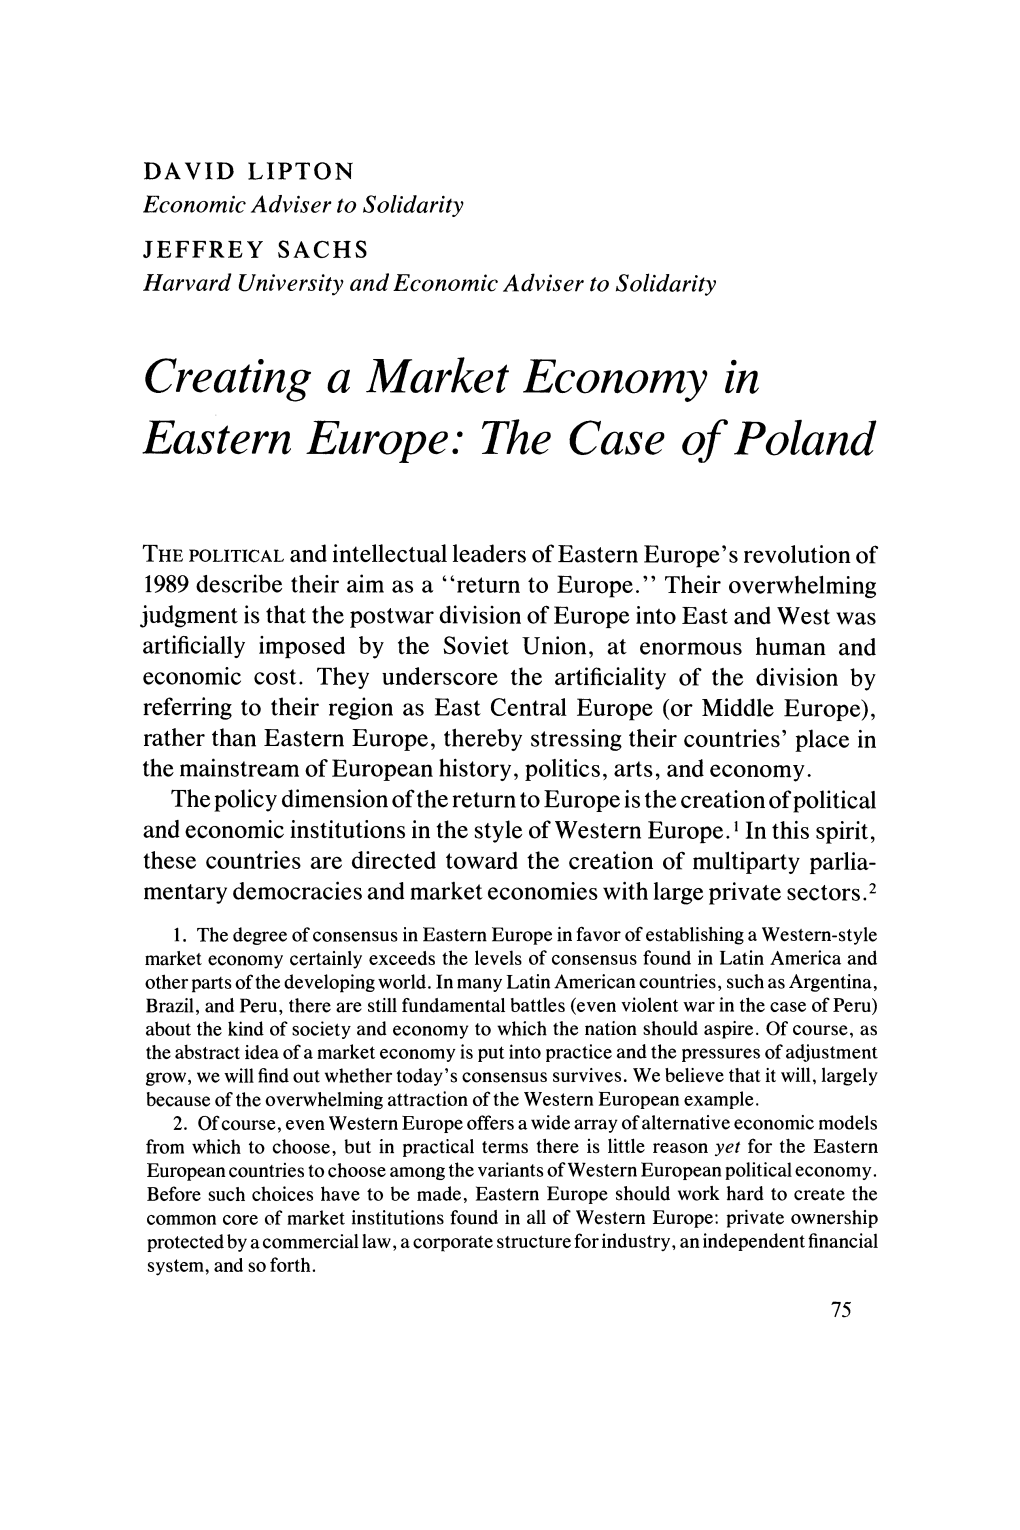 Creating a Market Economy in Eastern Europe: the Case of Poland